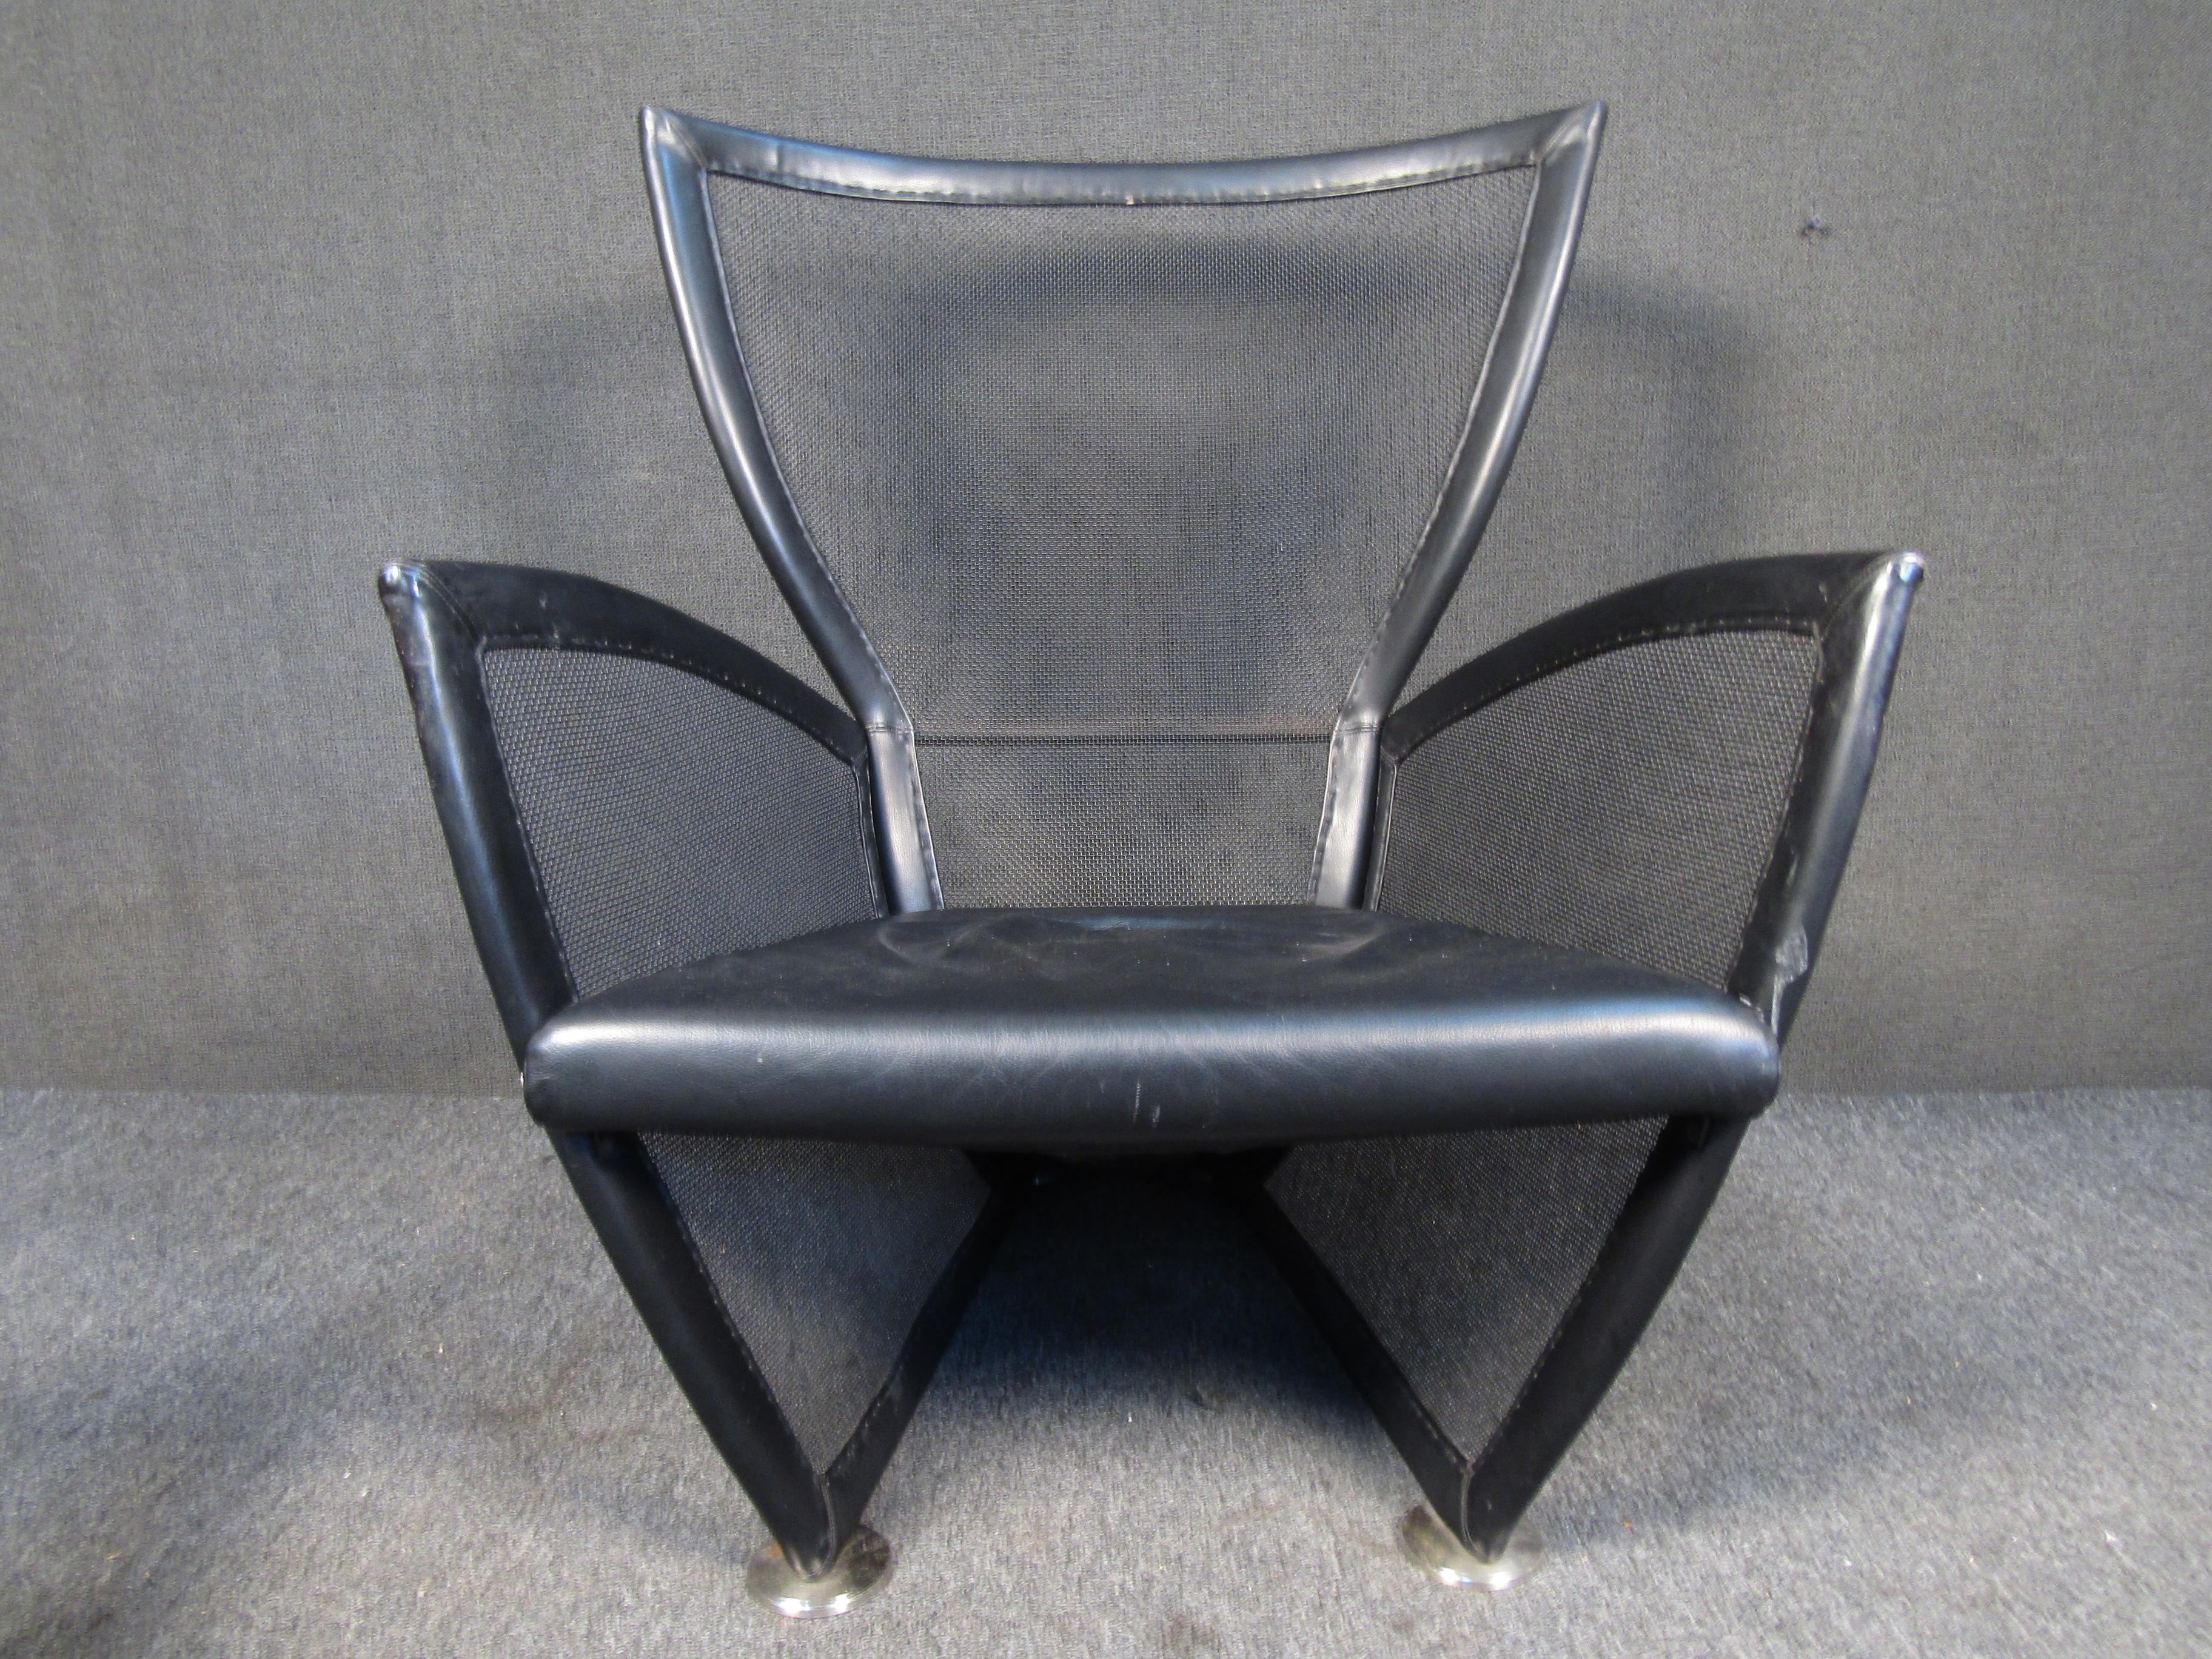 20th Century Lounge Chair and Ottoman Set by Paolo Nava Prive For Sale